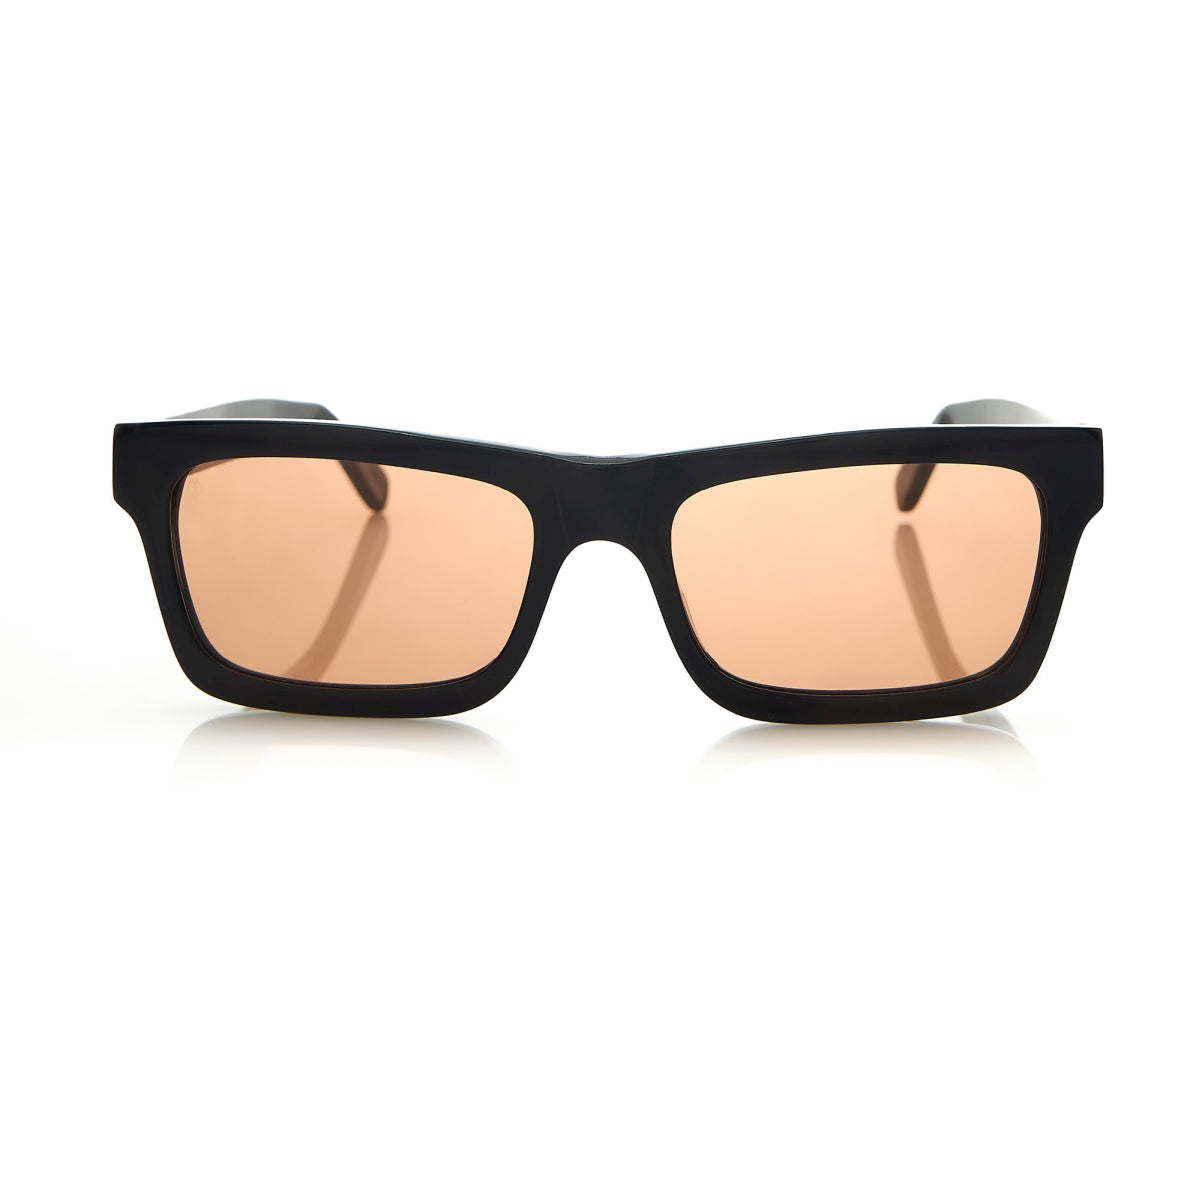 KYTHERA IN EREVOS BLACK WITH POTTERY BROWN LENSES